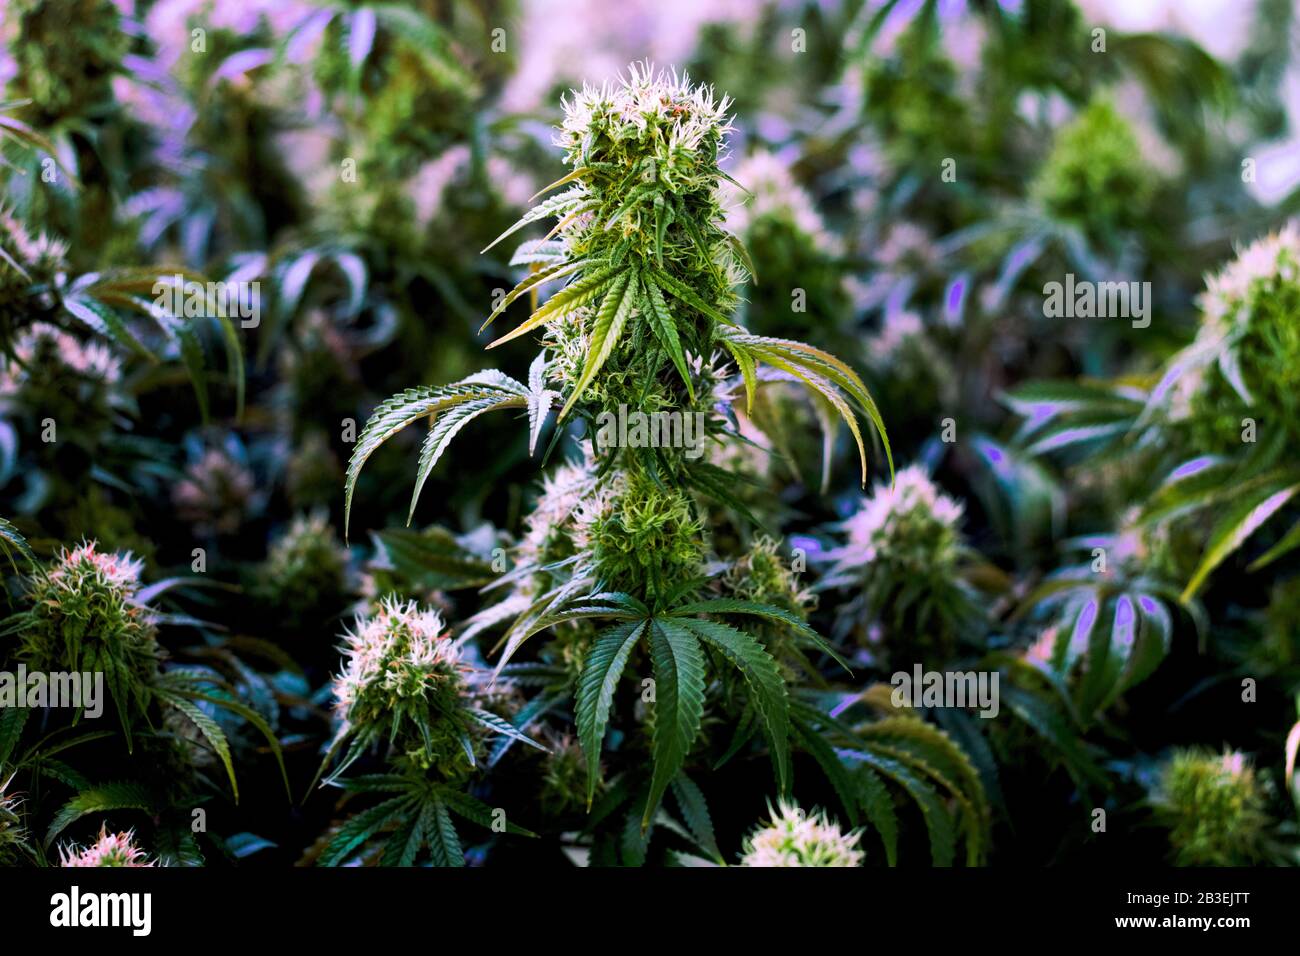 Mature indoor medical recreational marijuana cannabis industry plants with large developed cola flowers Stock Photo